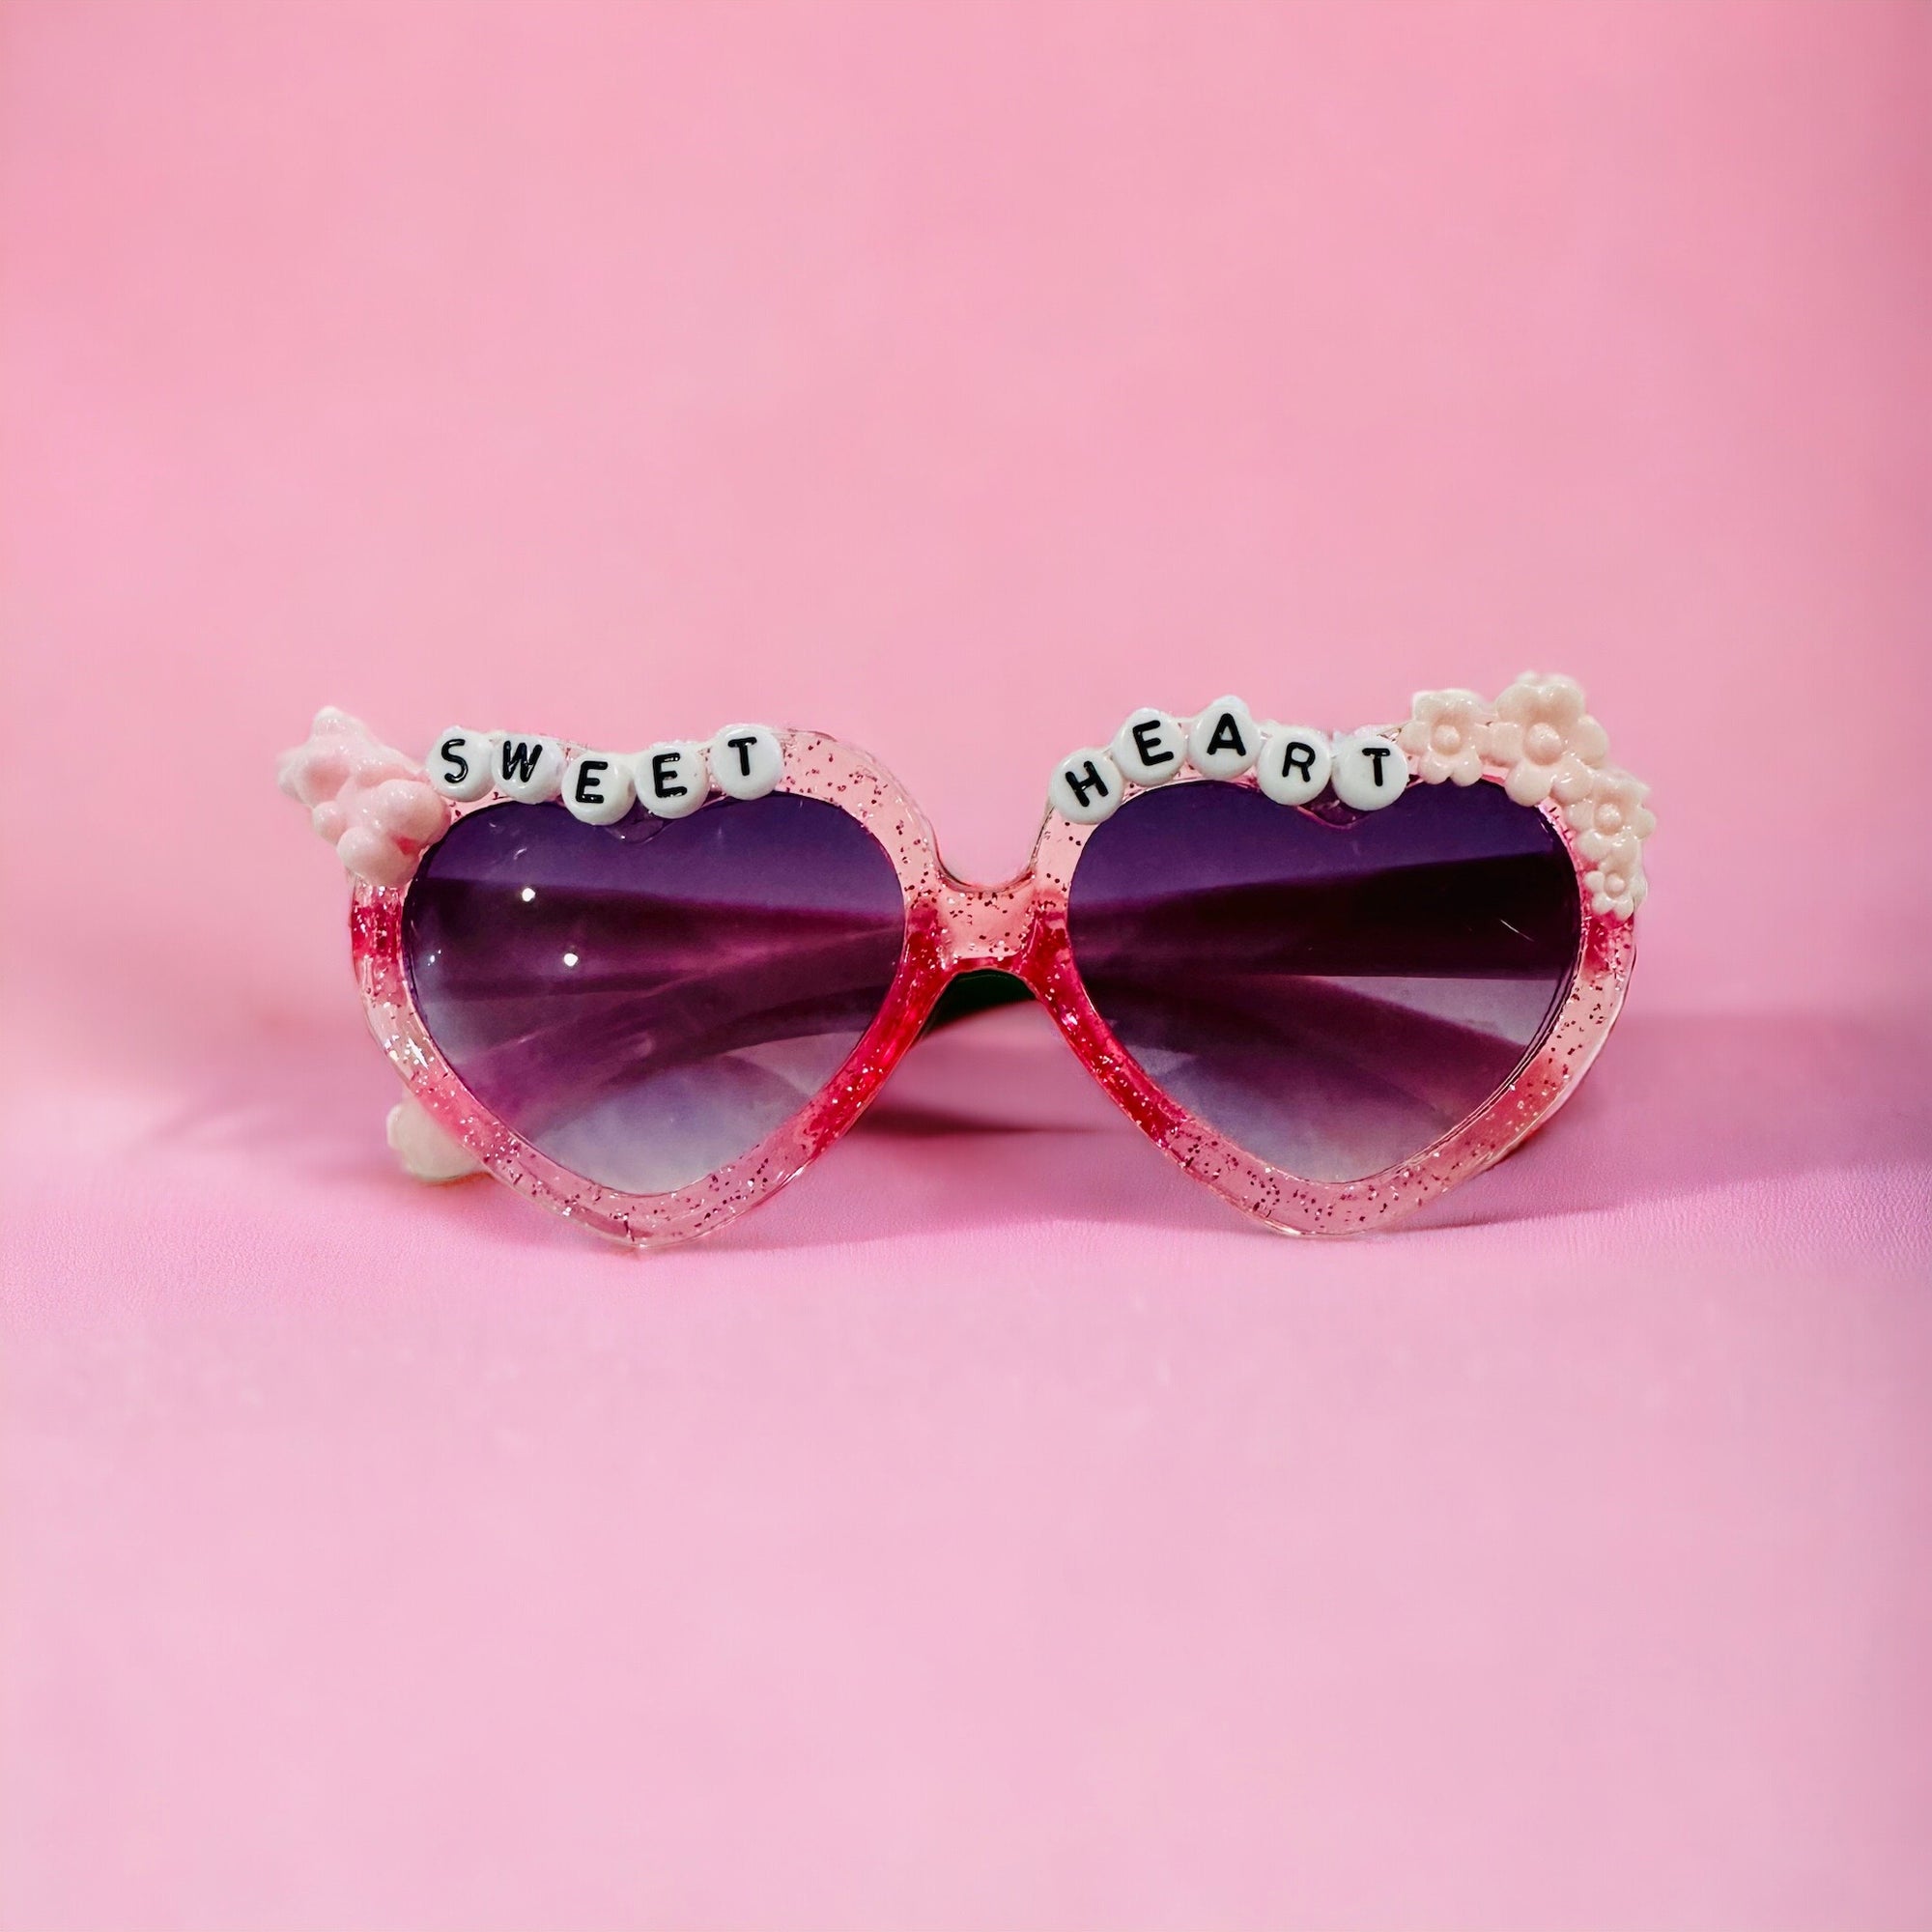 Summer Vibes Adult Pink Pearl "Sweetheart" Heart Sunnies